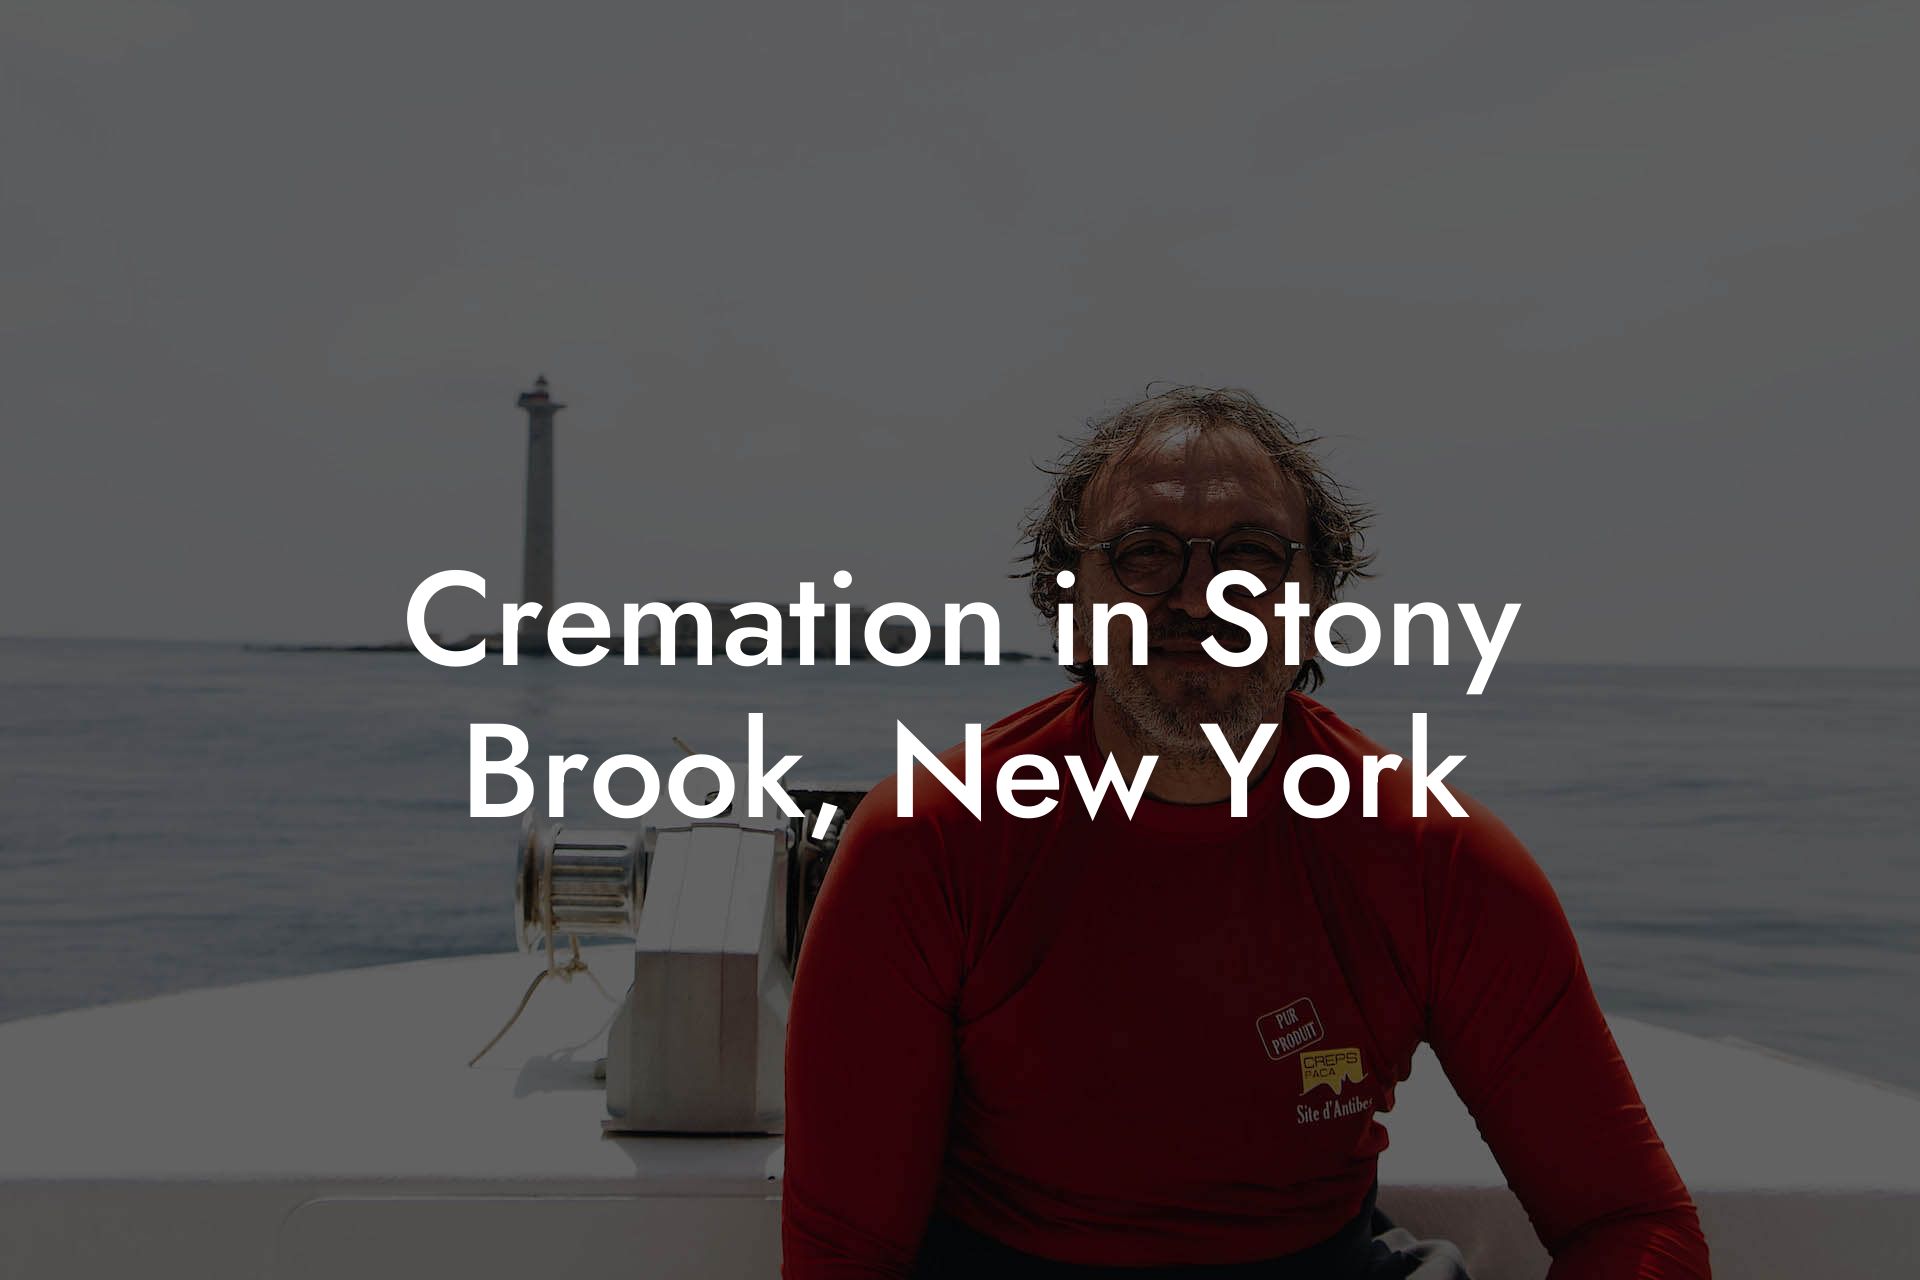 Cremation in Stony Brook, New York